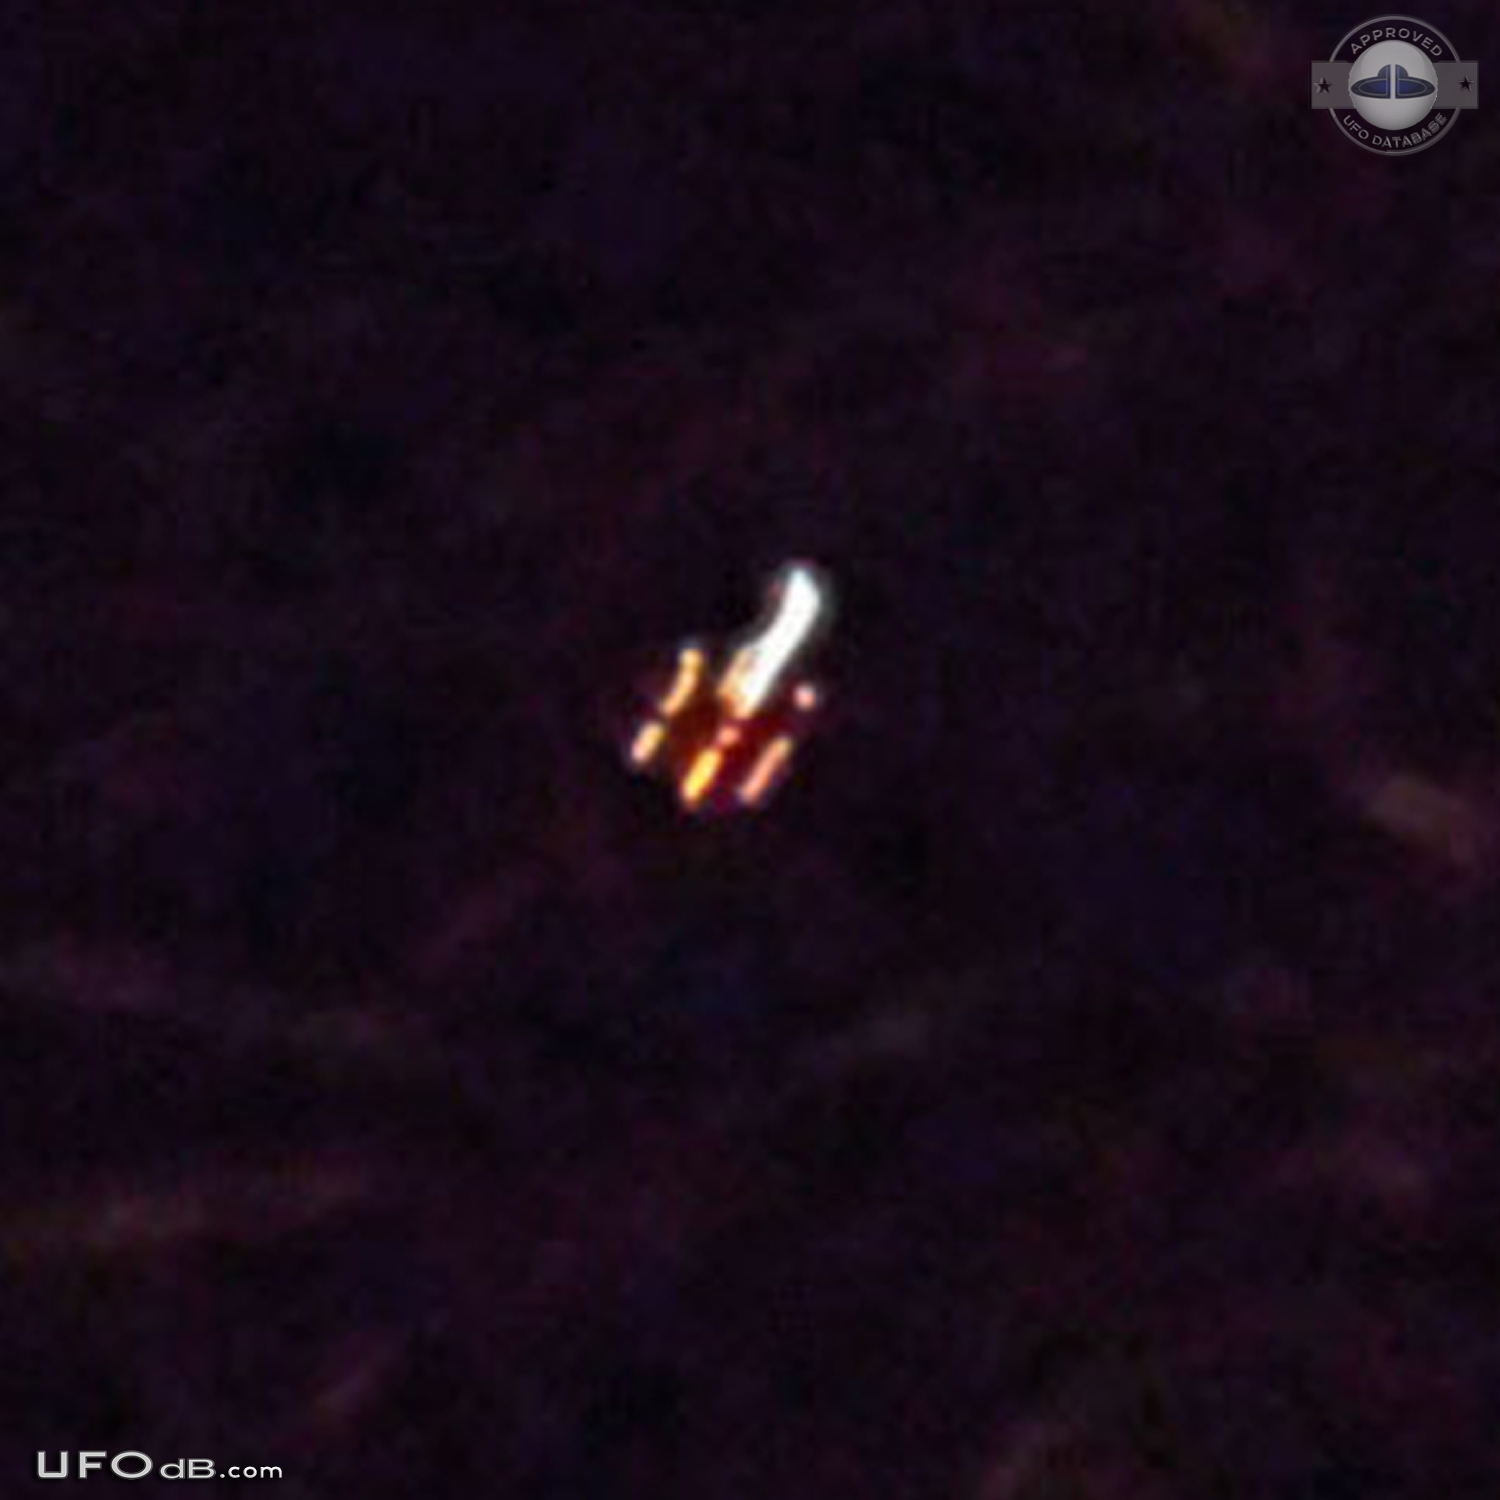 Strange object in the sky of Timmins Ontario Canada on January 22 2015 UFO Picture #581-3